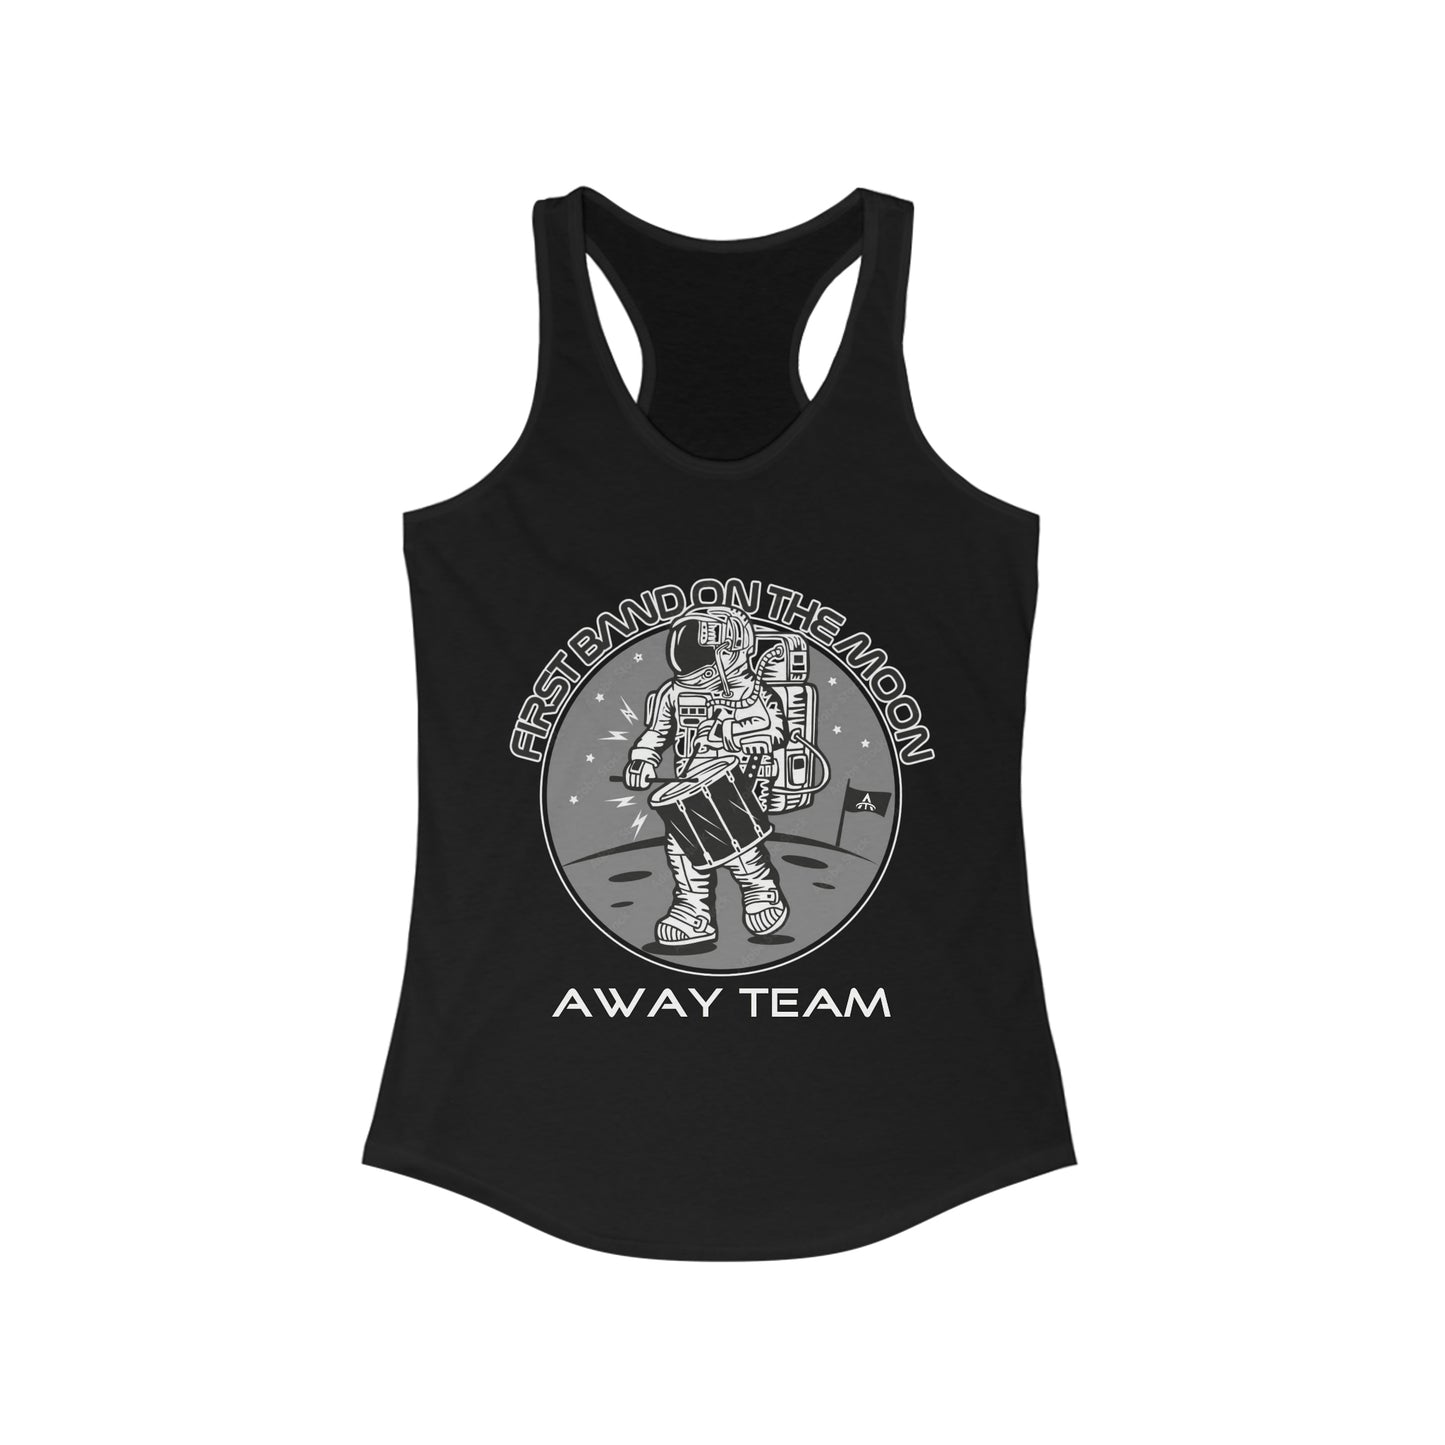 Away Team Band on the Moon Women's Ideal Racerback Tank